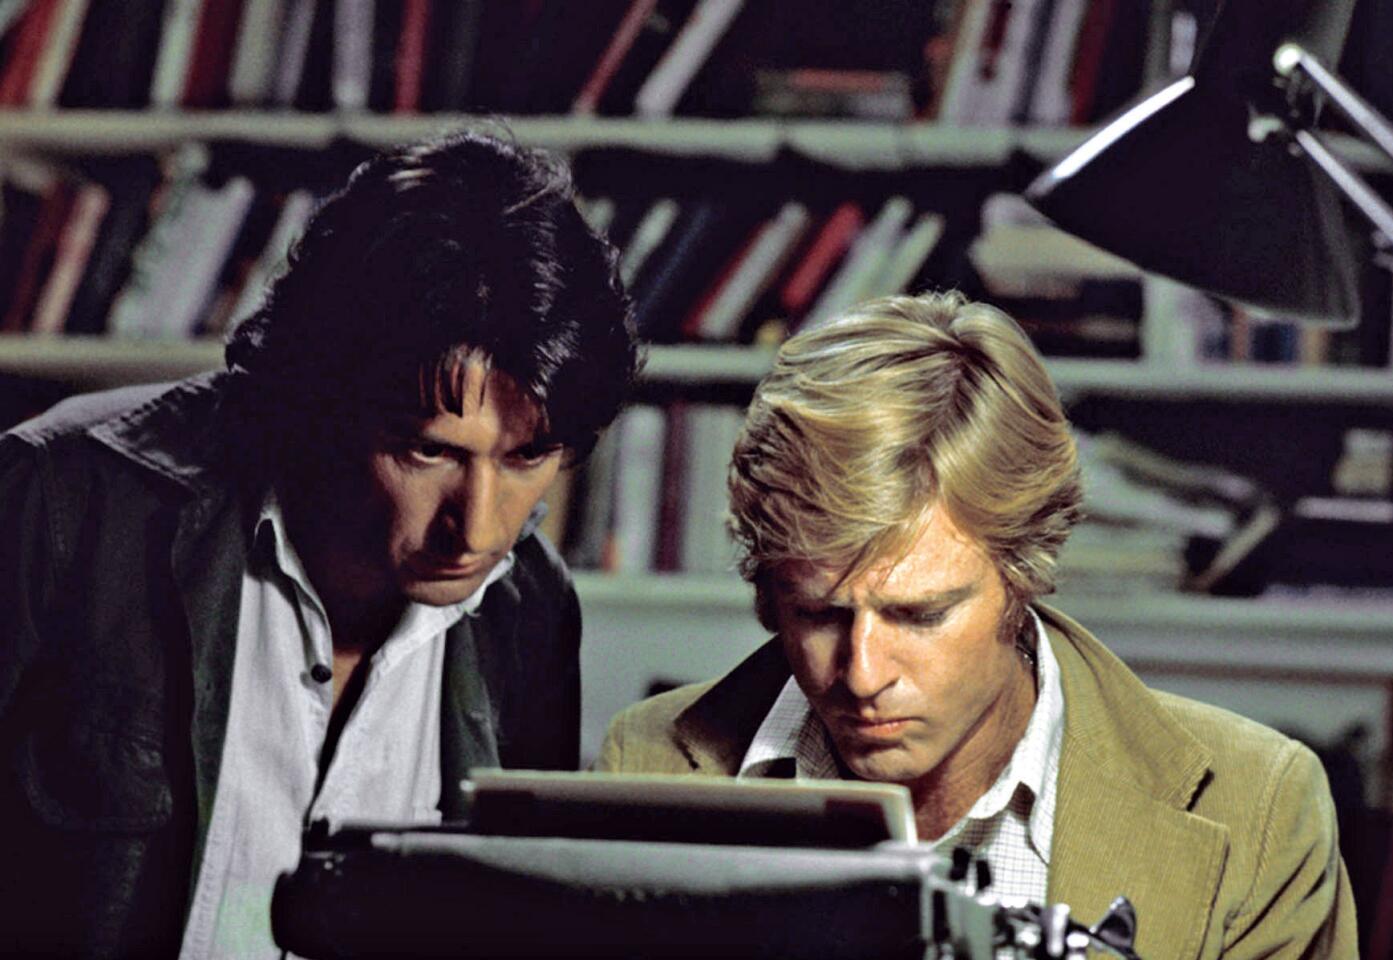 Actors Robert Redford, right, and Dustin Hoffman appear in their roles as reporters Bob Woodward and Carl Bernstein, respectively, in the 1976 film "All the President's Men."